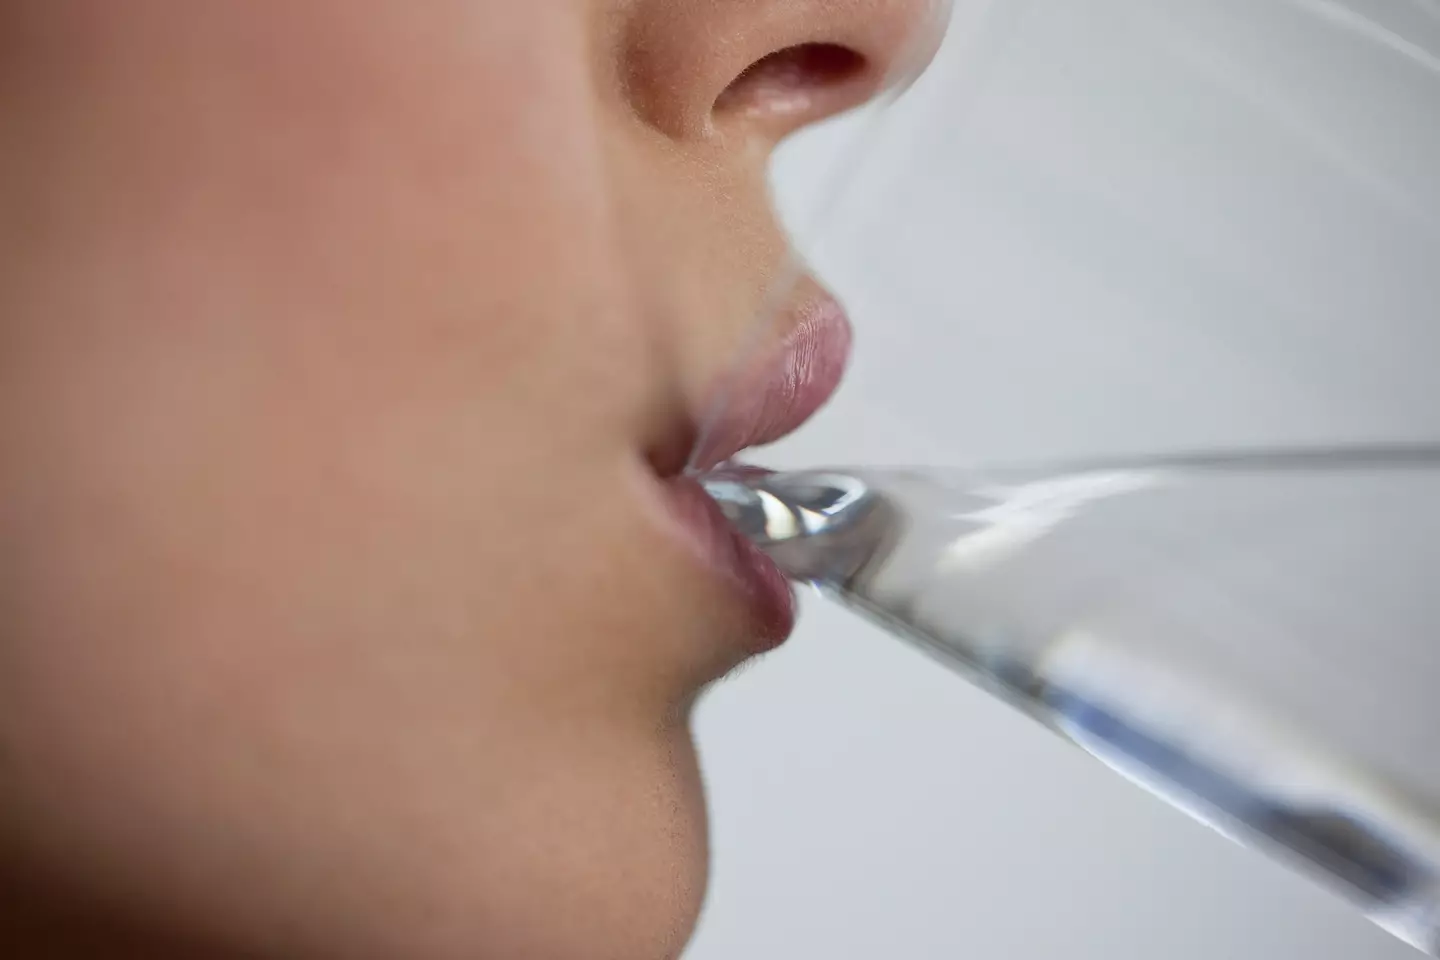 It's likely that the tap water you drink has been drank by at least ten other people before.